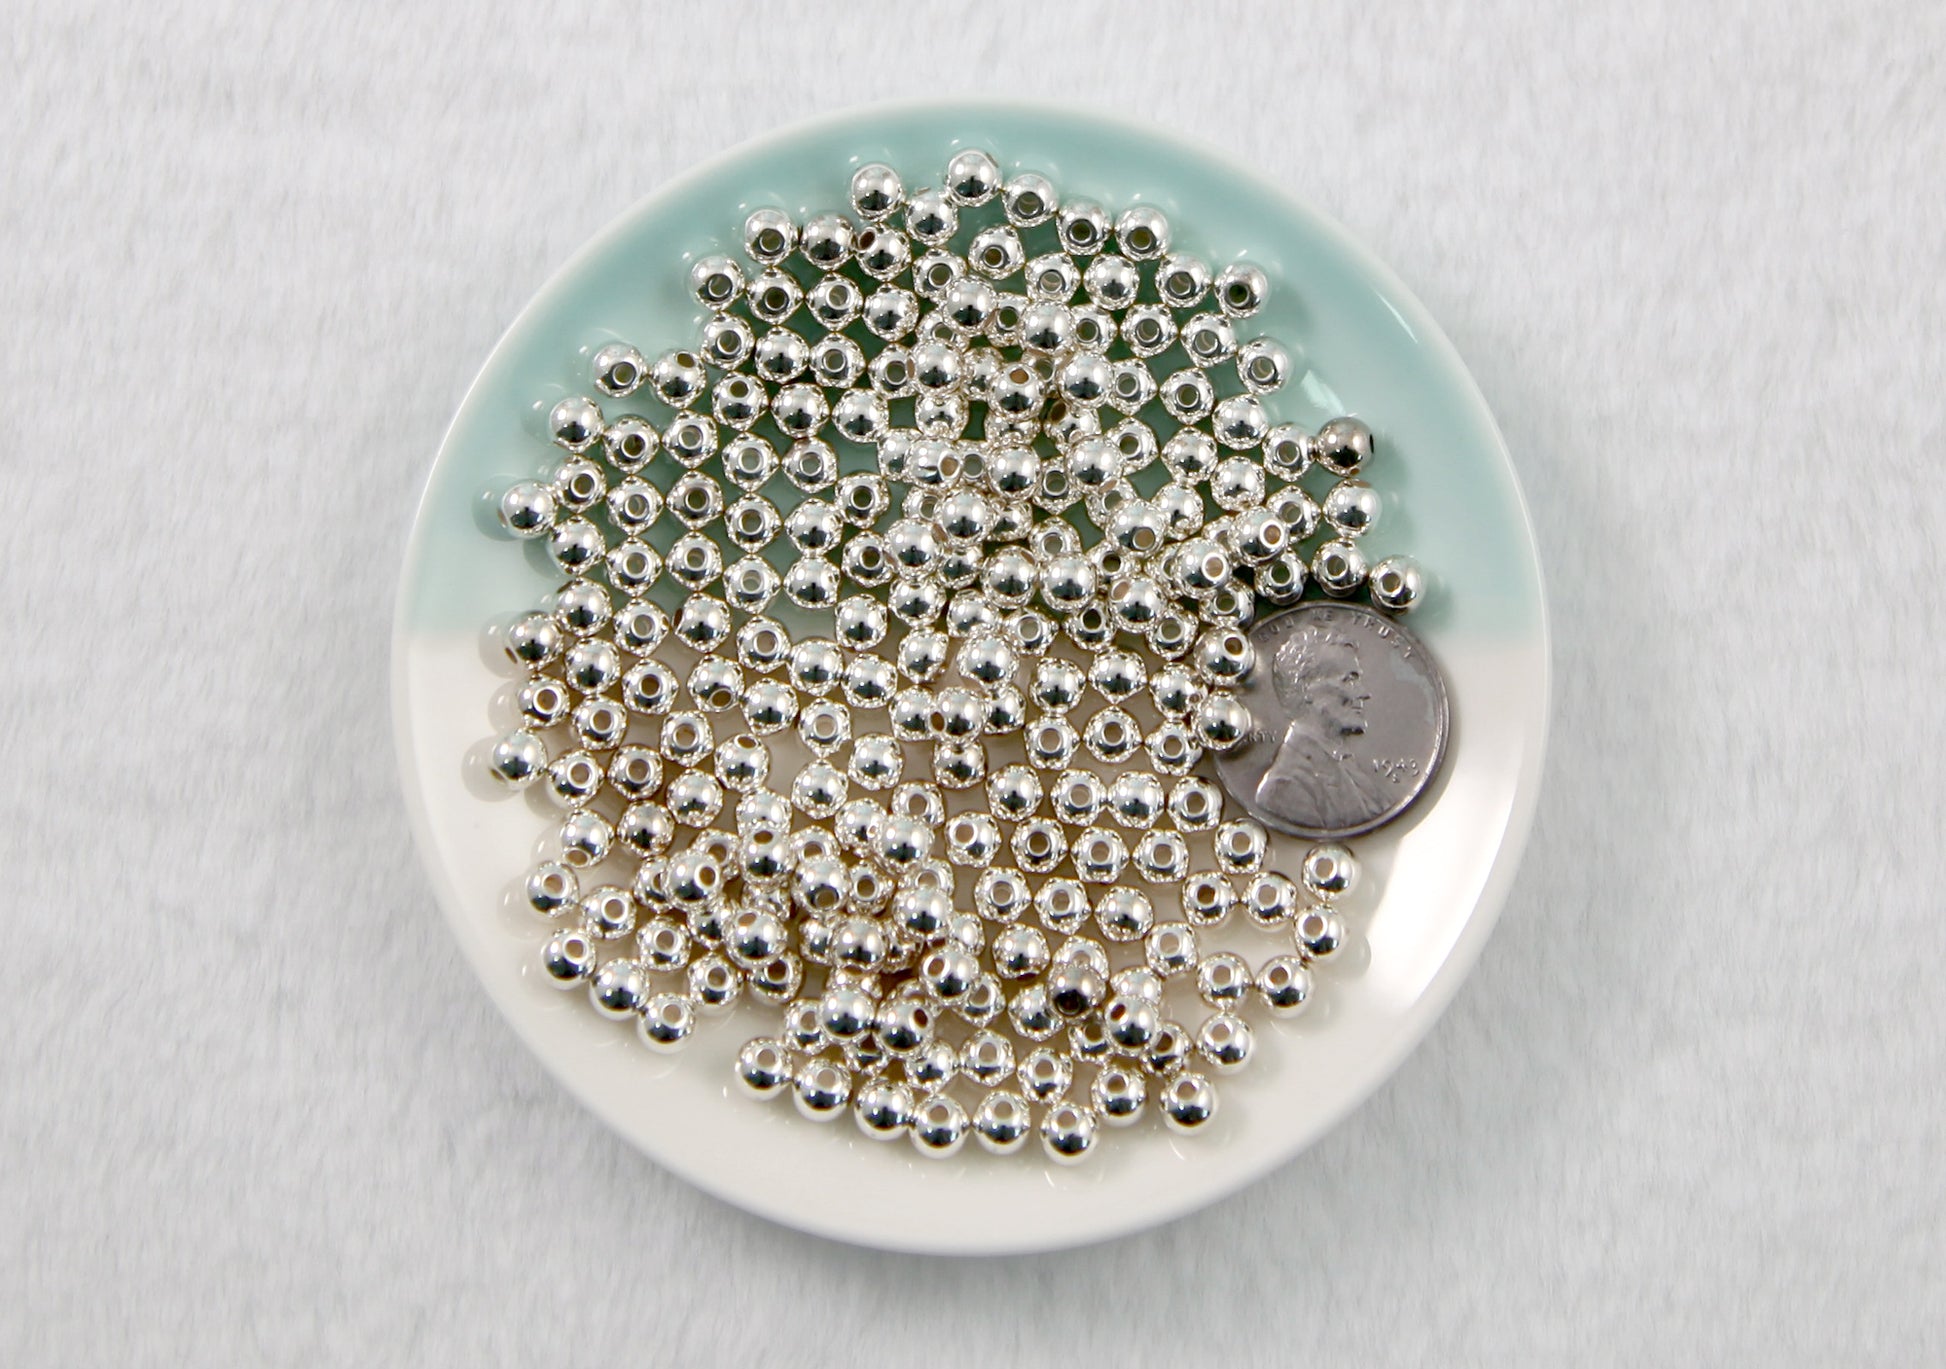 5mm Silver Plated Round Ball Spacer Beads